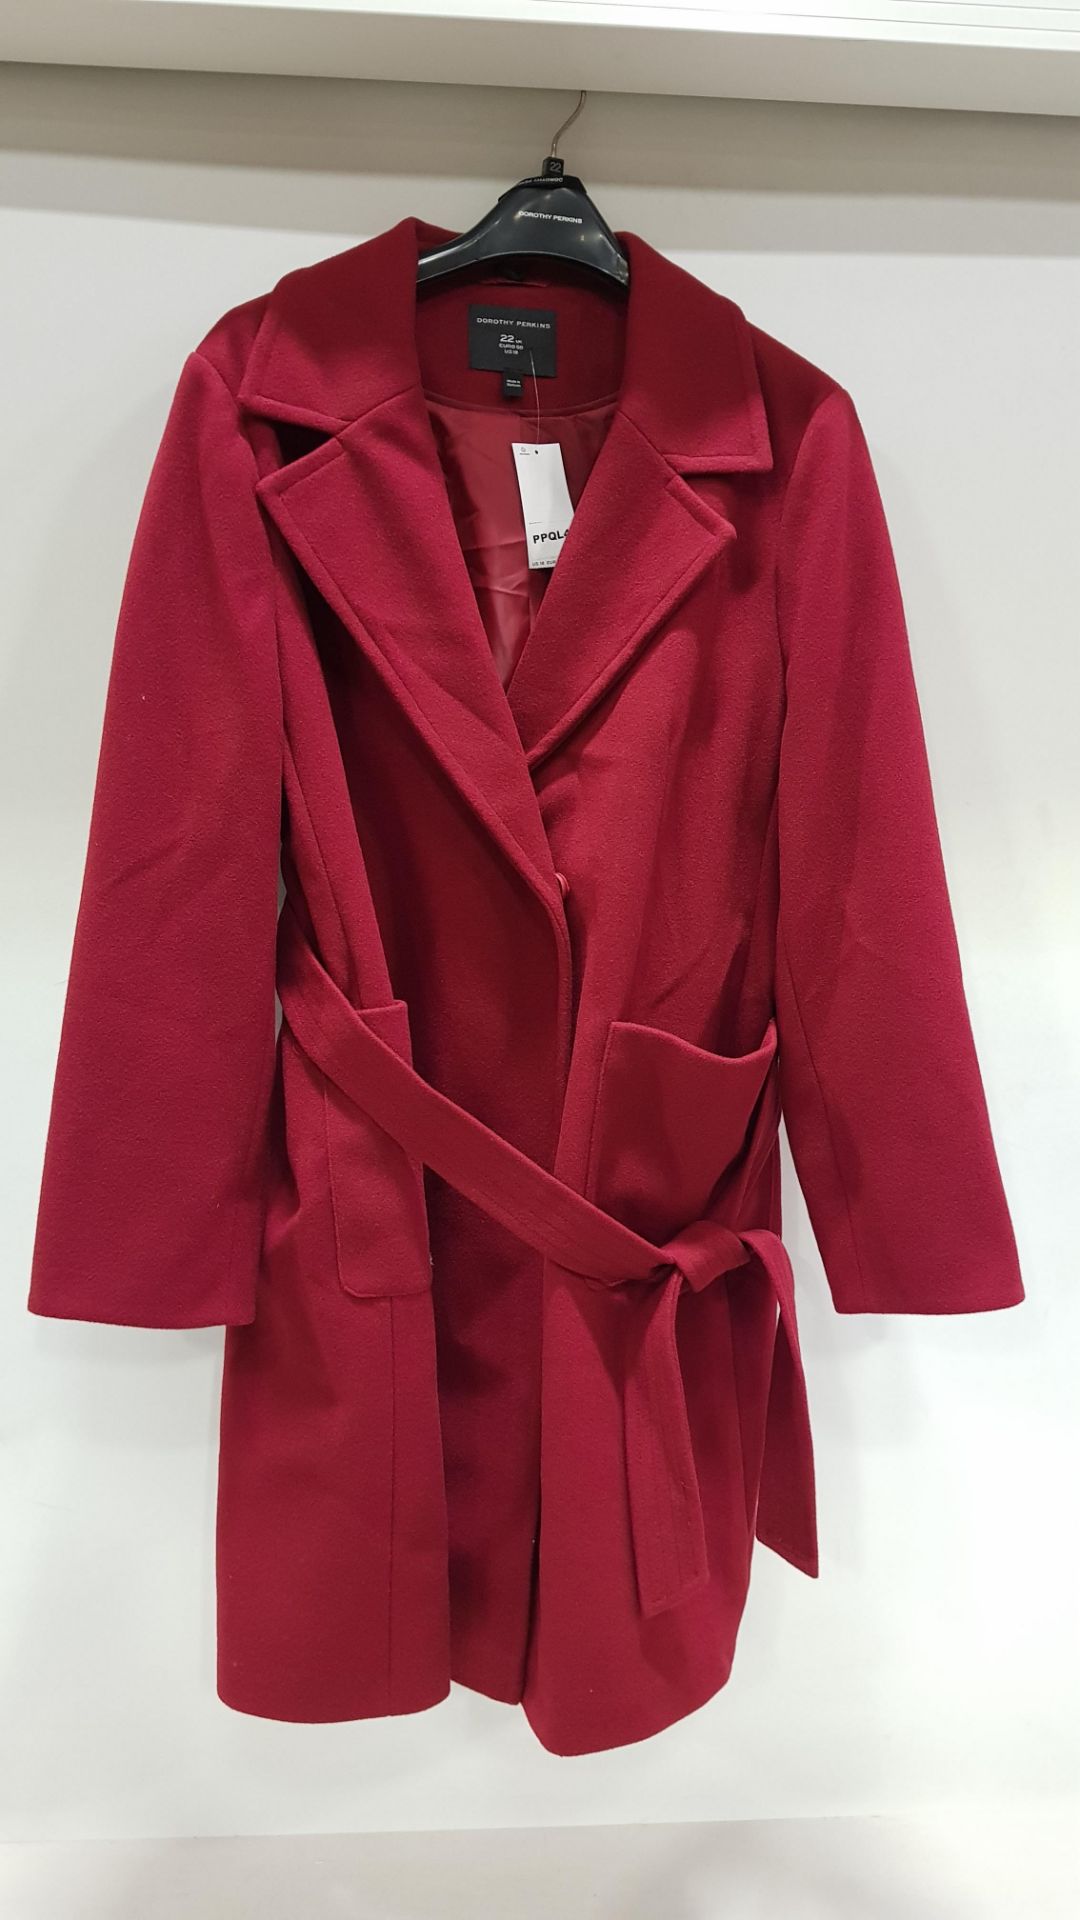 5 X BRAND NEW DOROTHY PERKINS RED LONG BUTTONED COATS WITH BELT SIZE UK 20(4) AND 6(1)